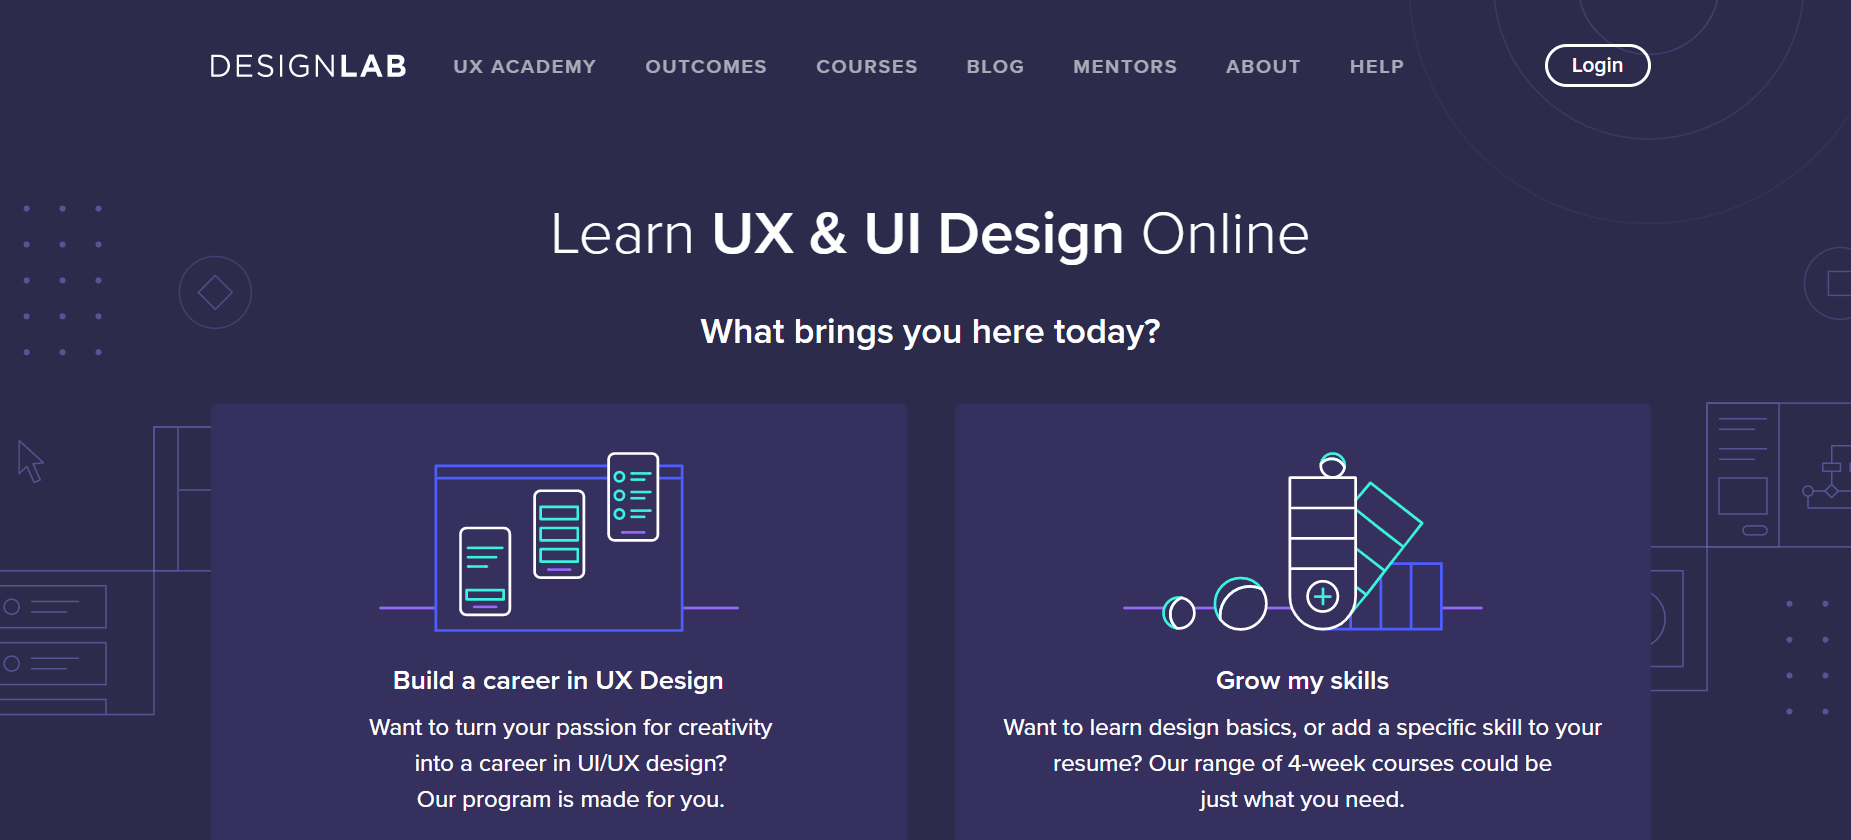 DesignLab Review: How This Platform Can Help You Launch a Website